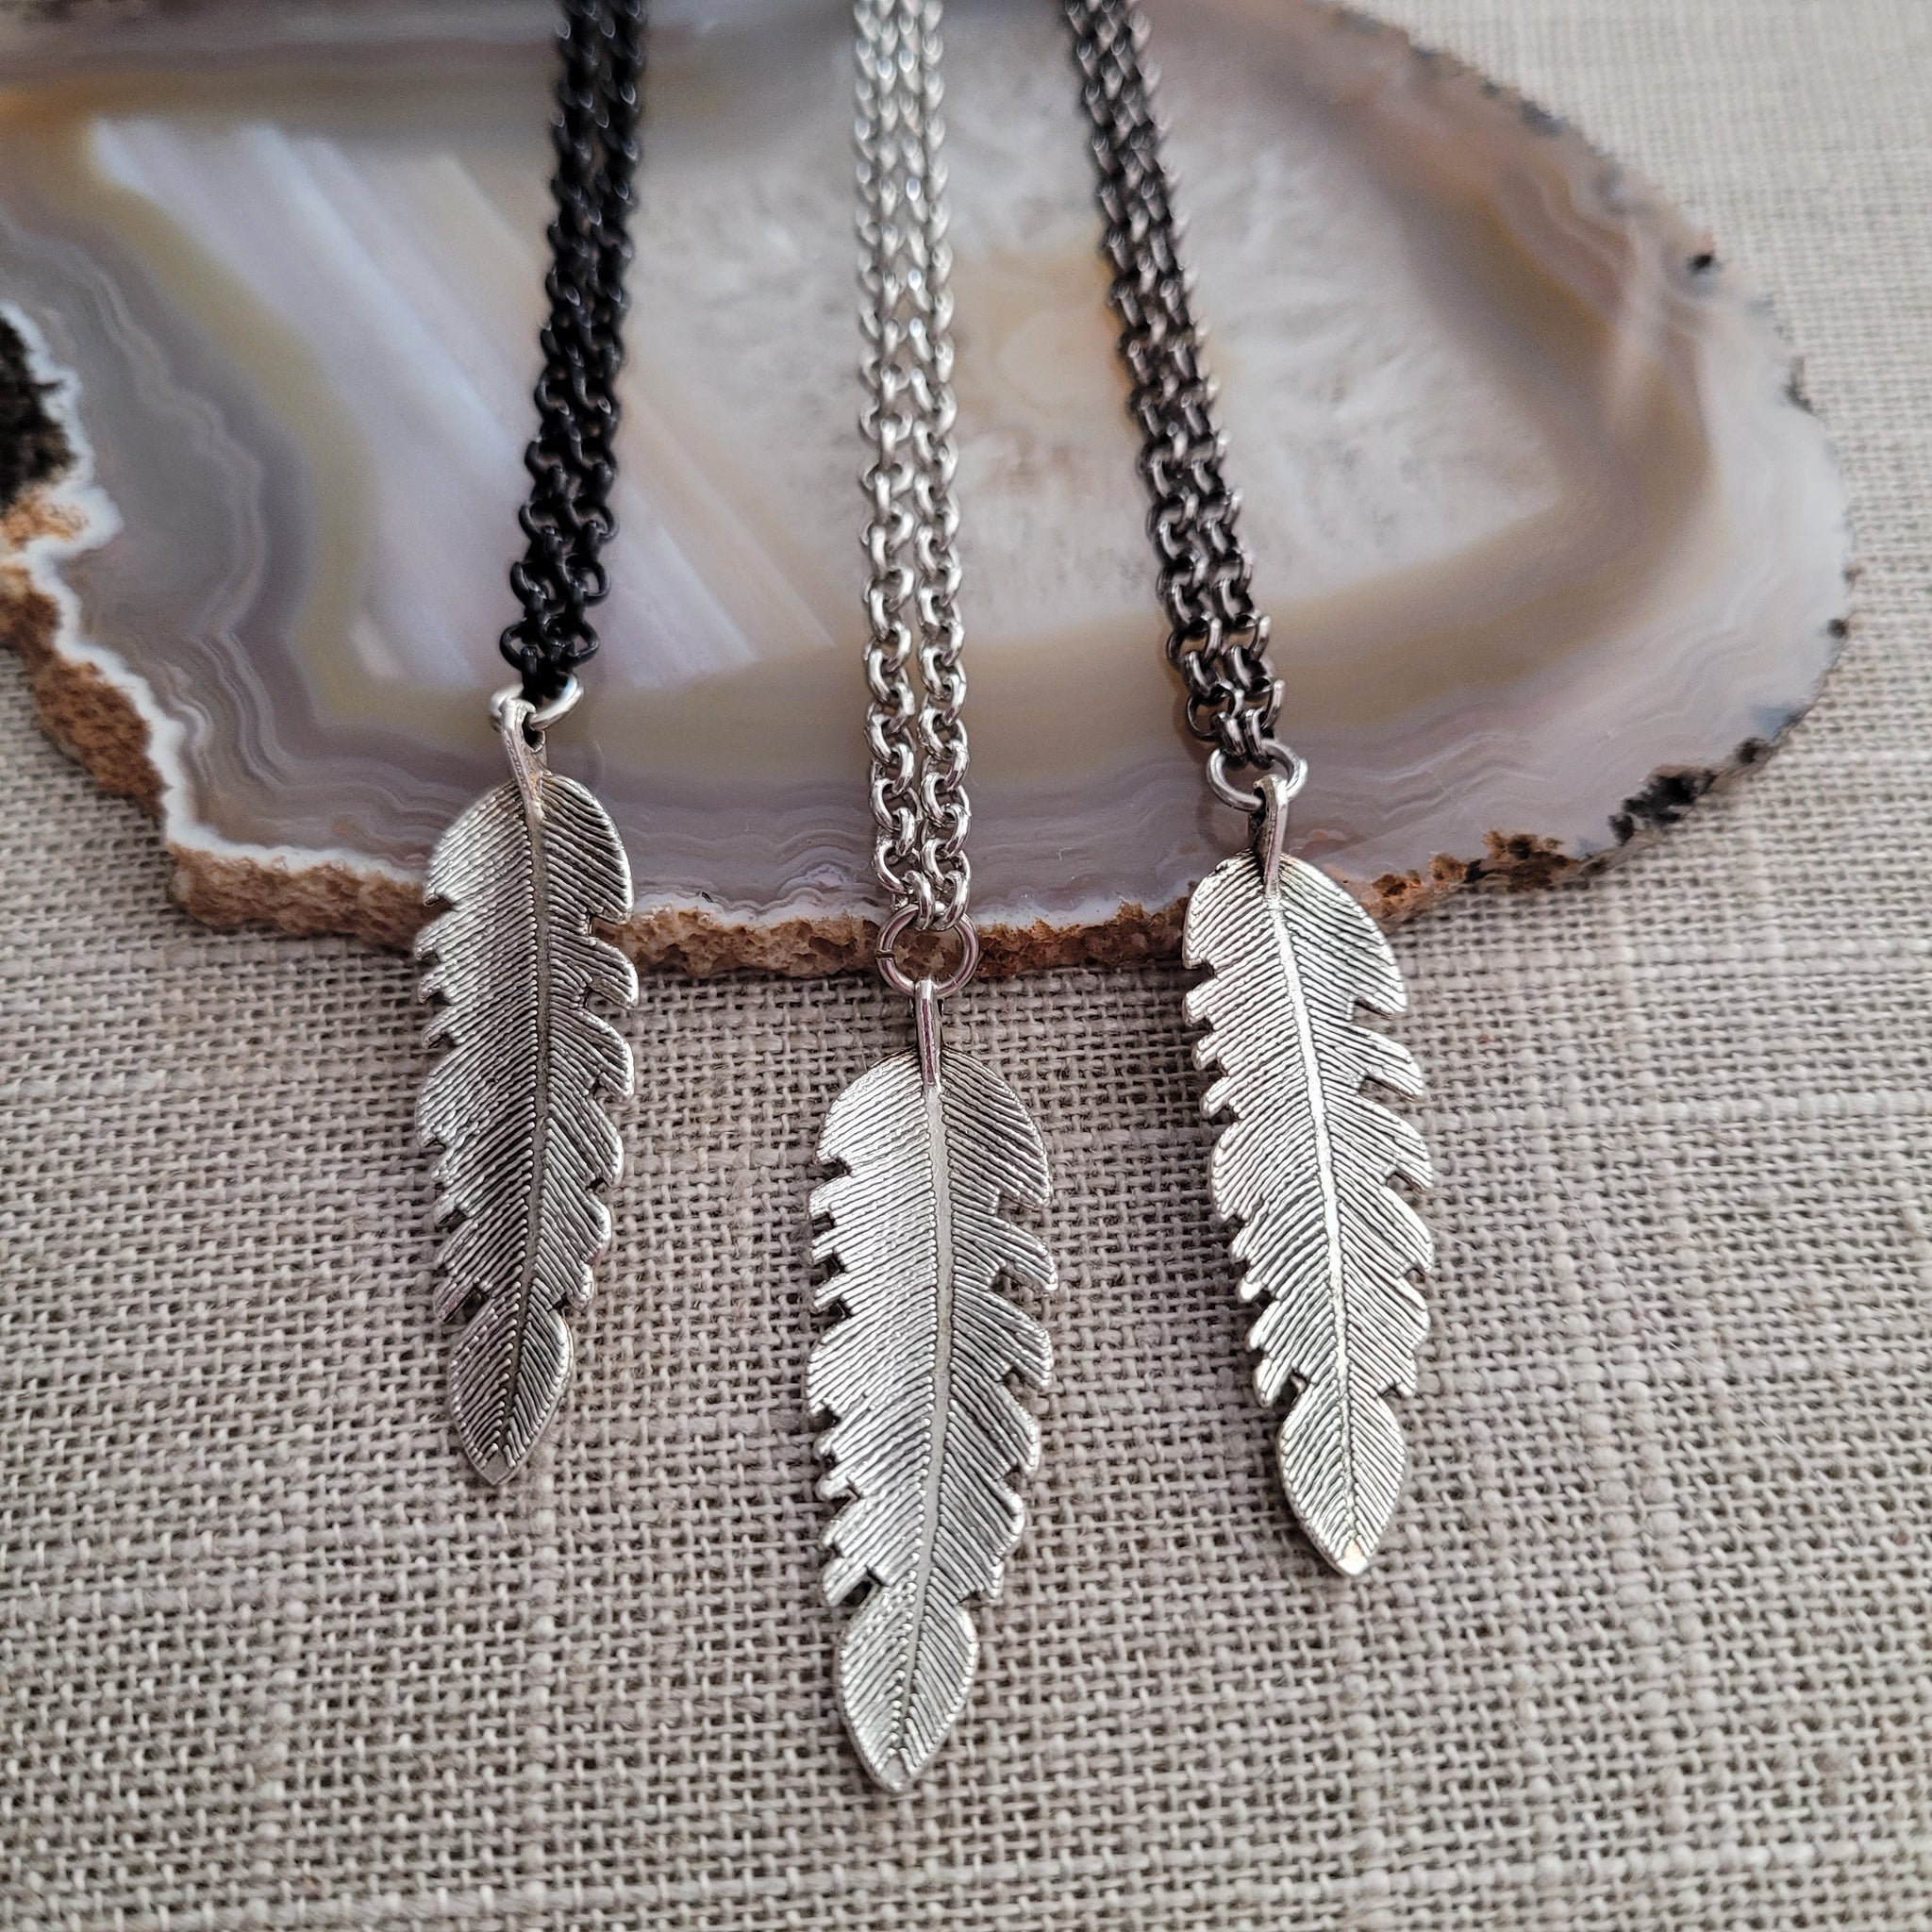 THE MEN THING Vintage Alloy Feather Pendant with Adjustable Pure Leather  Cord Necklace for Men Alloy Necklace Price in India - Buy THE MEN THING  Vintage Alloy Feather Pendant with Adjustable Pure